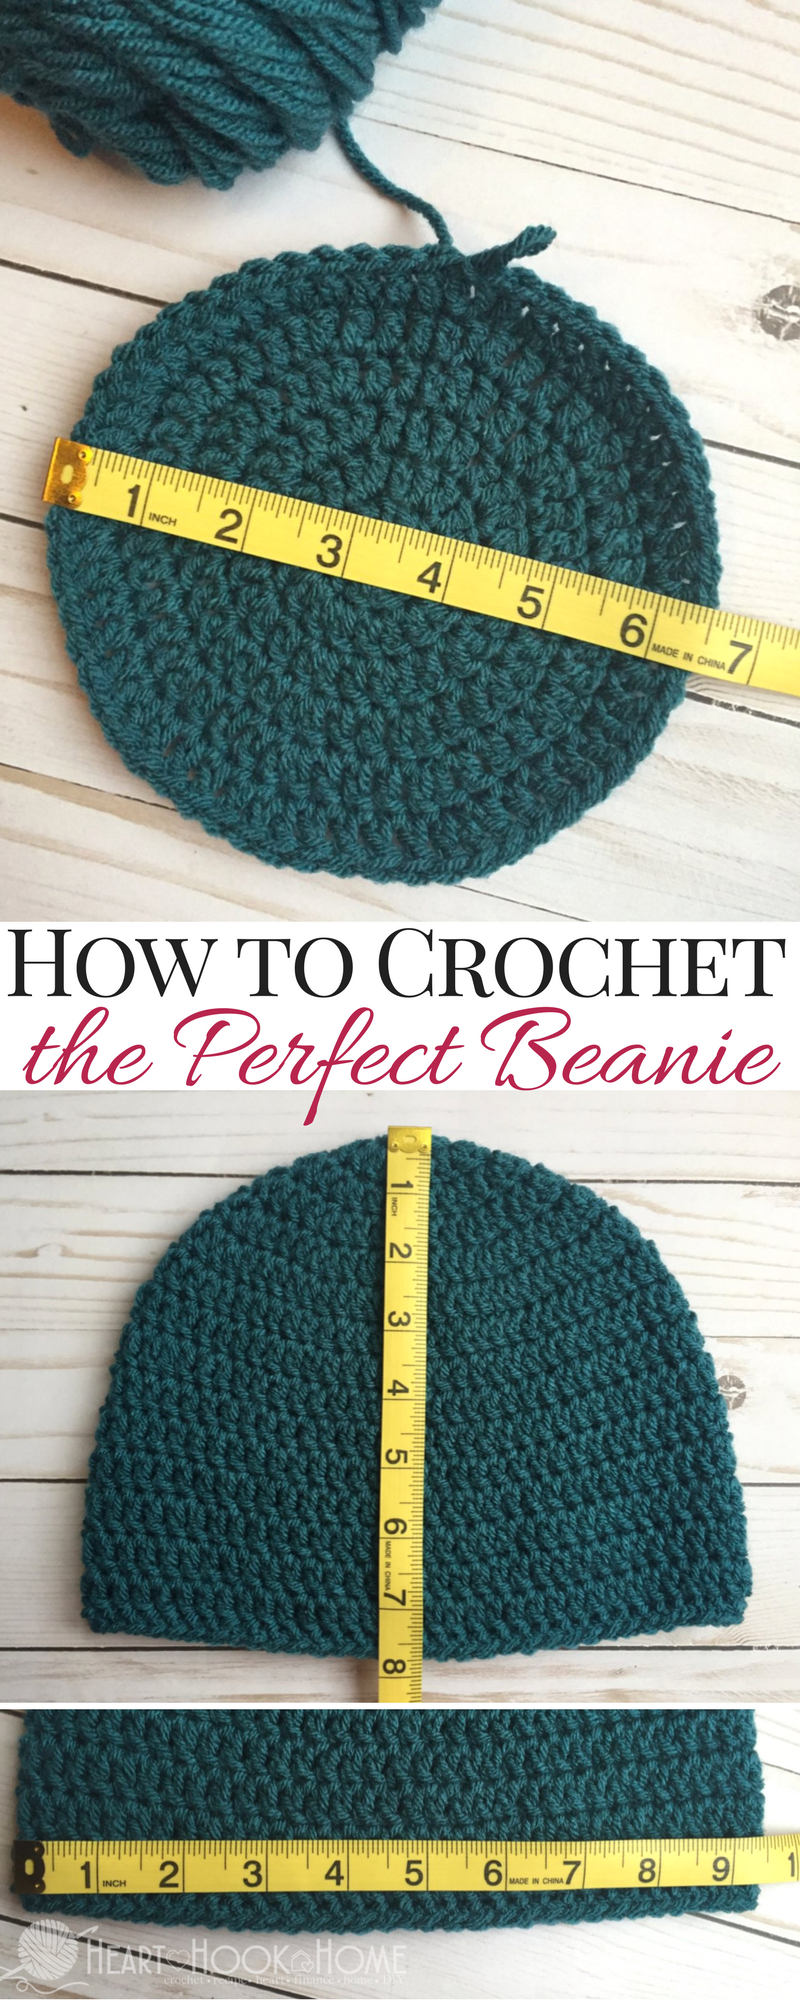 Adult Crochet Beanie Pattern How To Size Crochet Beanies Master Beanie Crochet Pattern